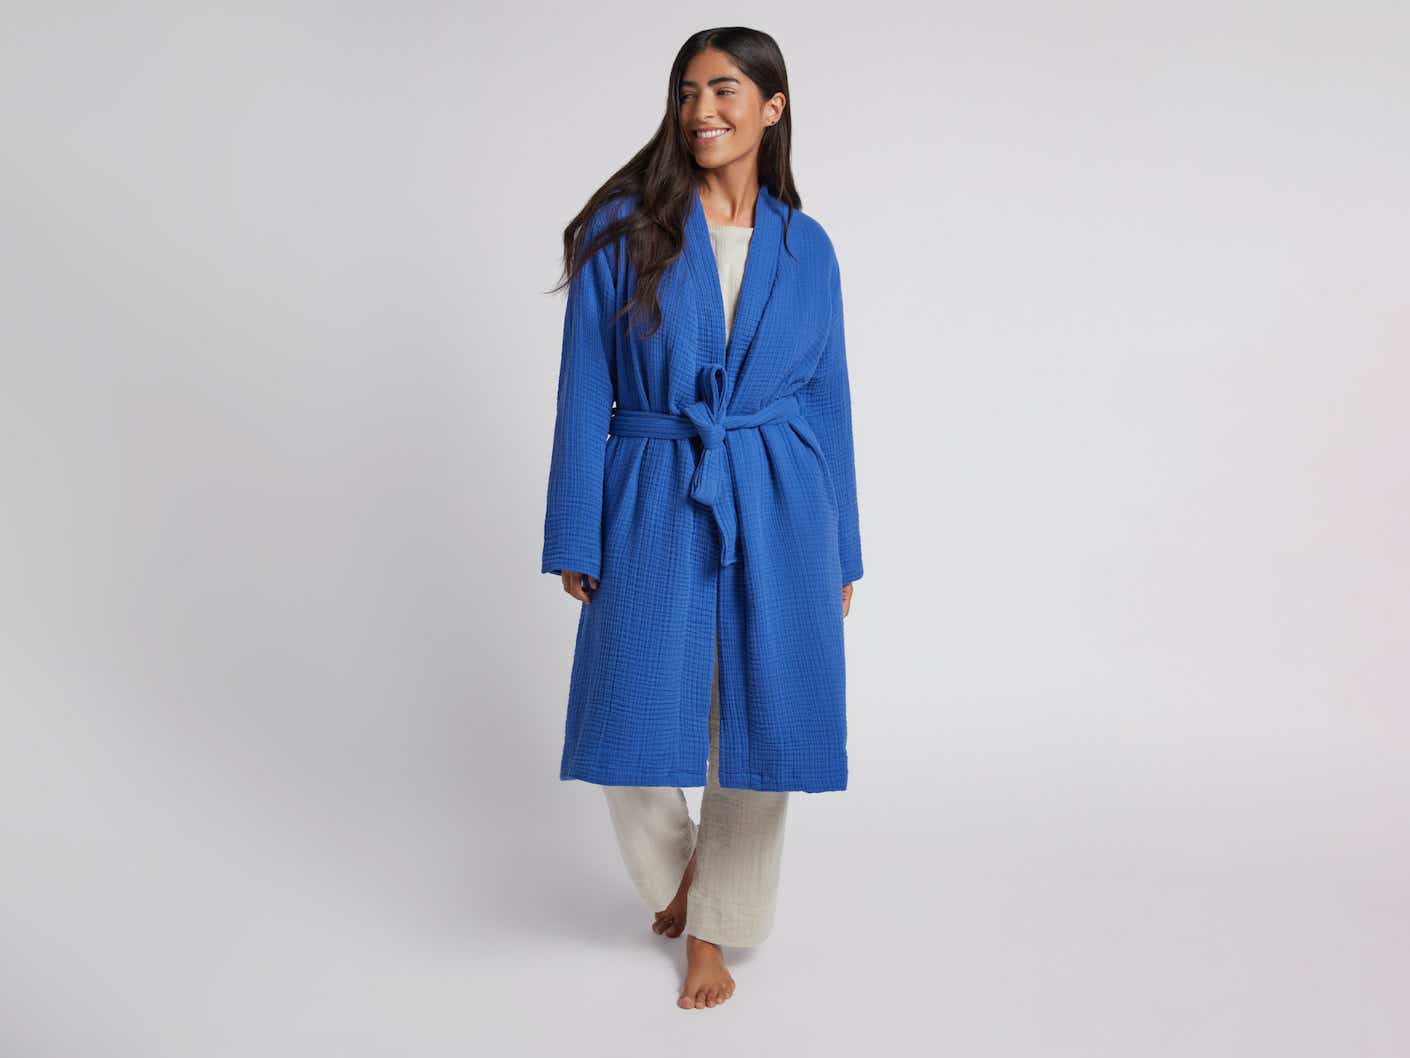 A woman wears a bright blue robe that falls beneath her knees.